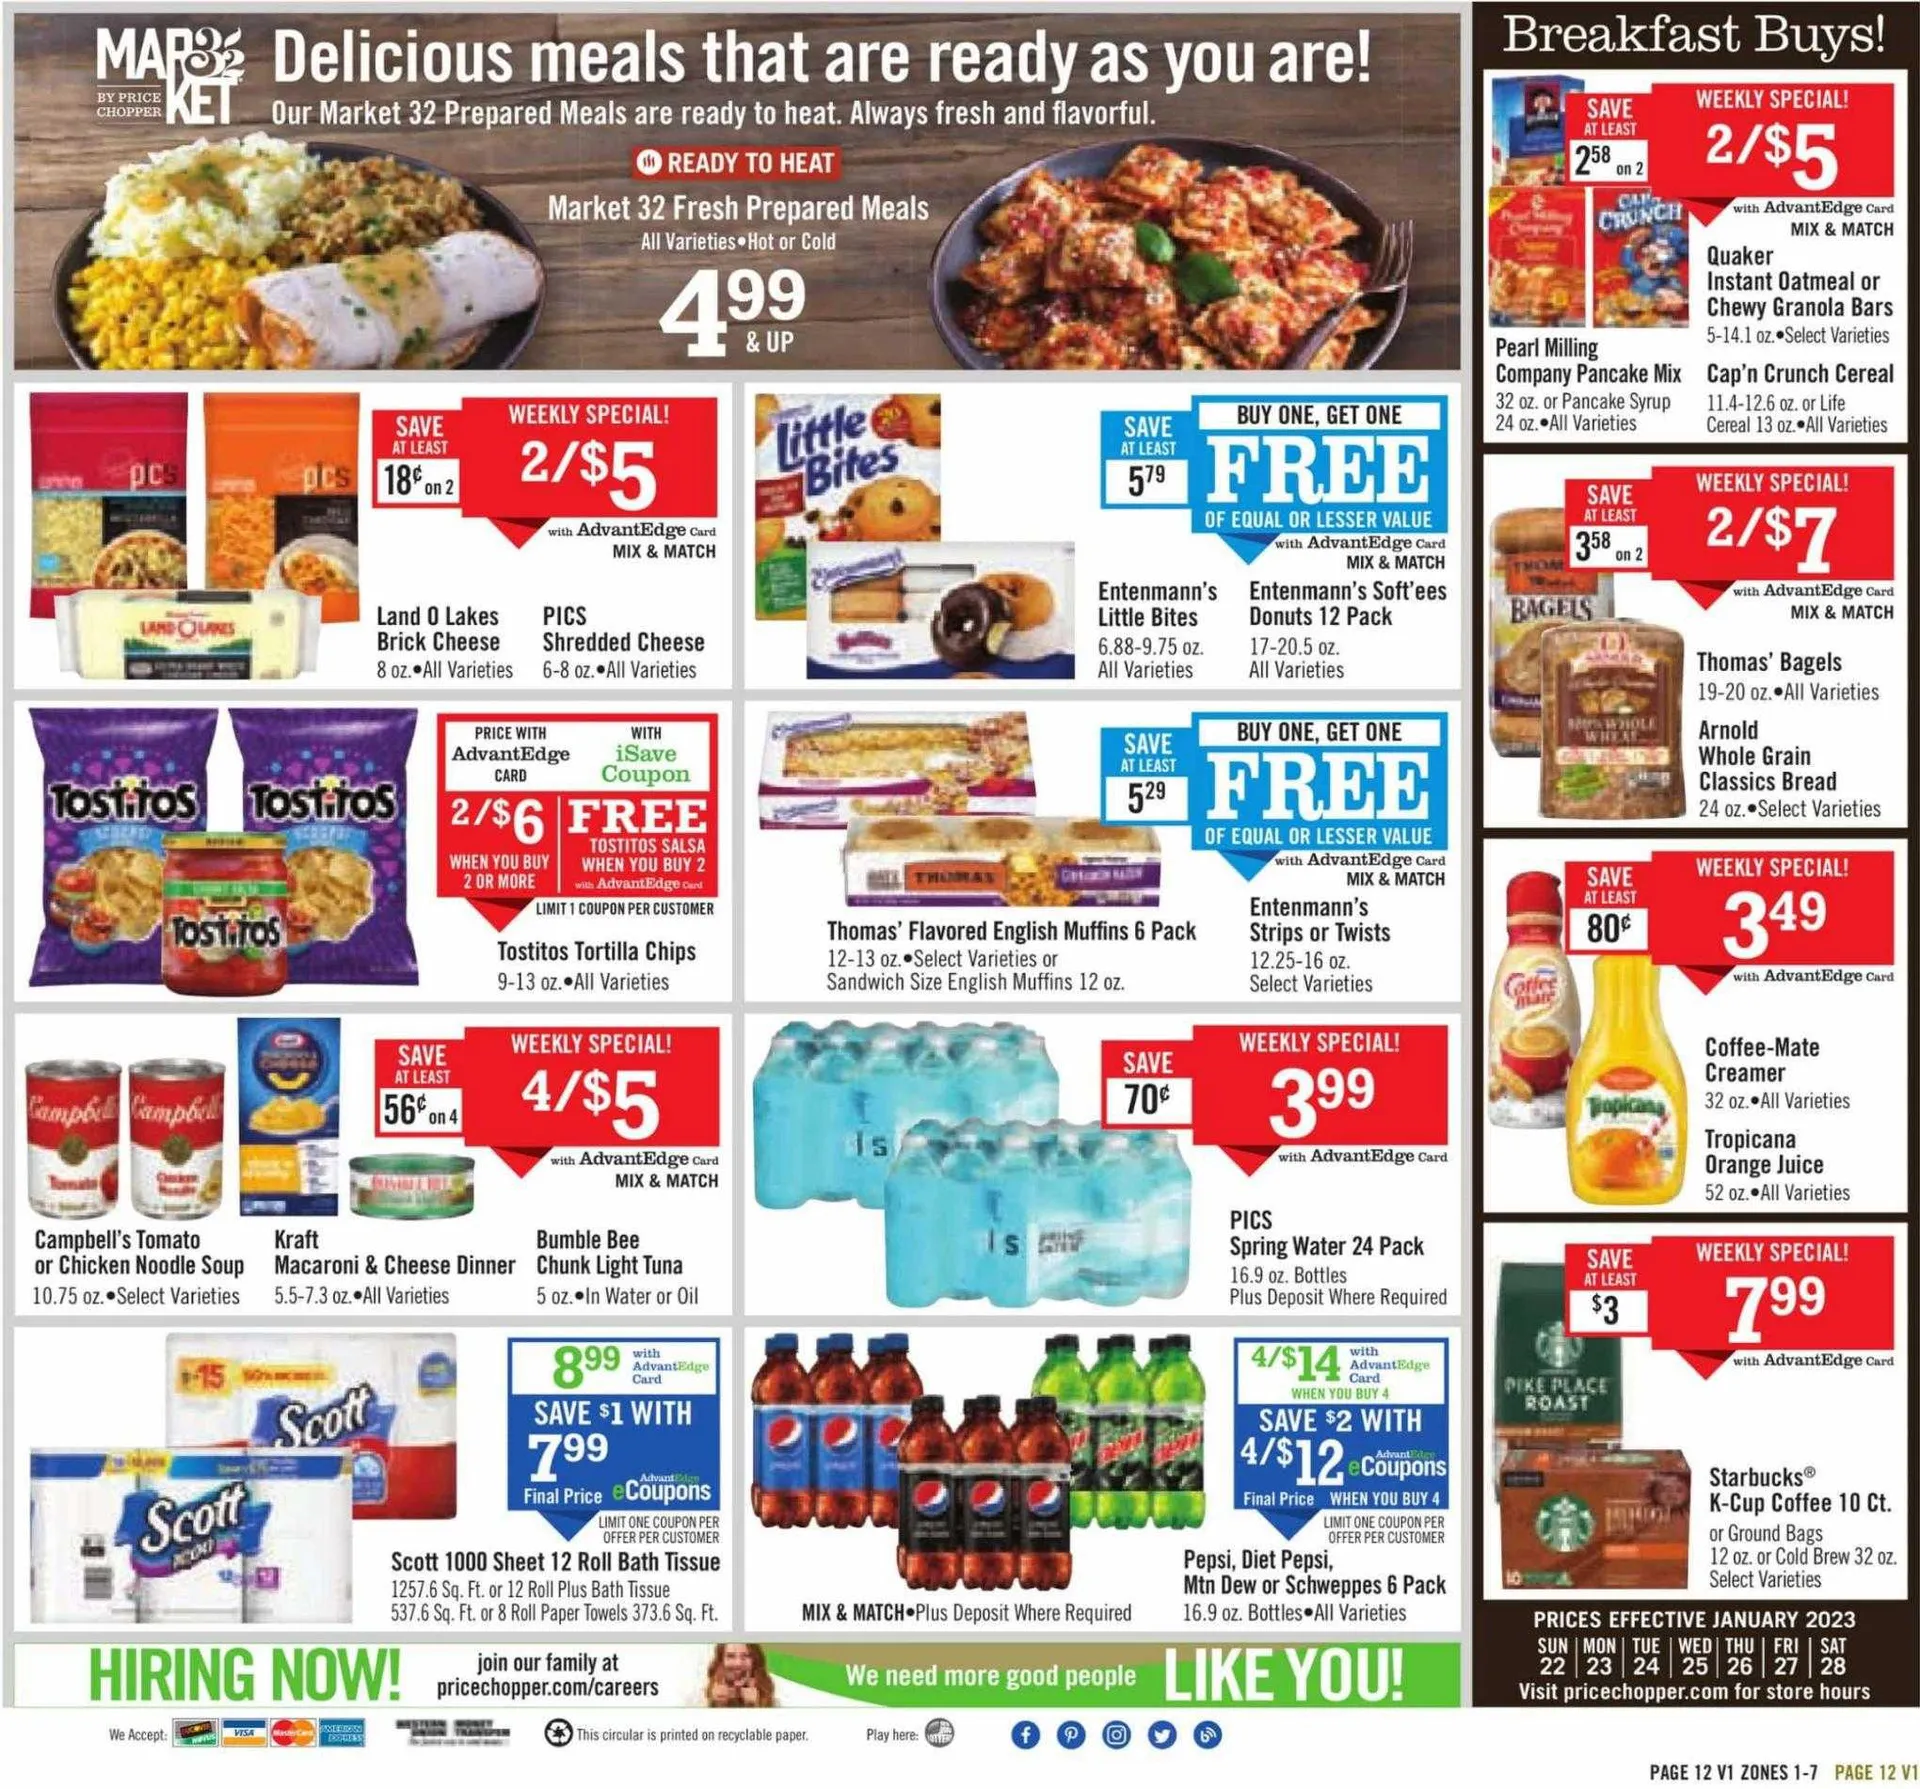 Price Chopper Weekly Ad - 12